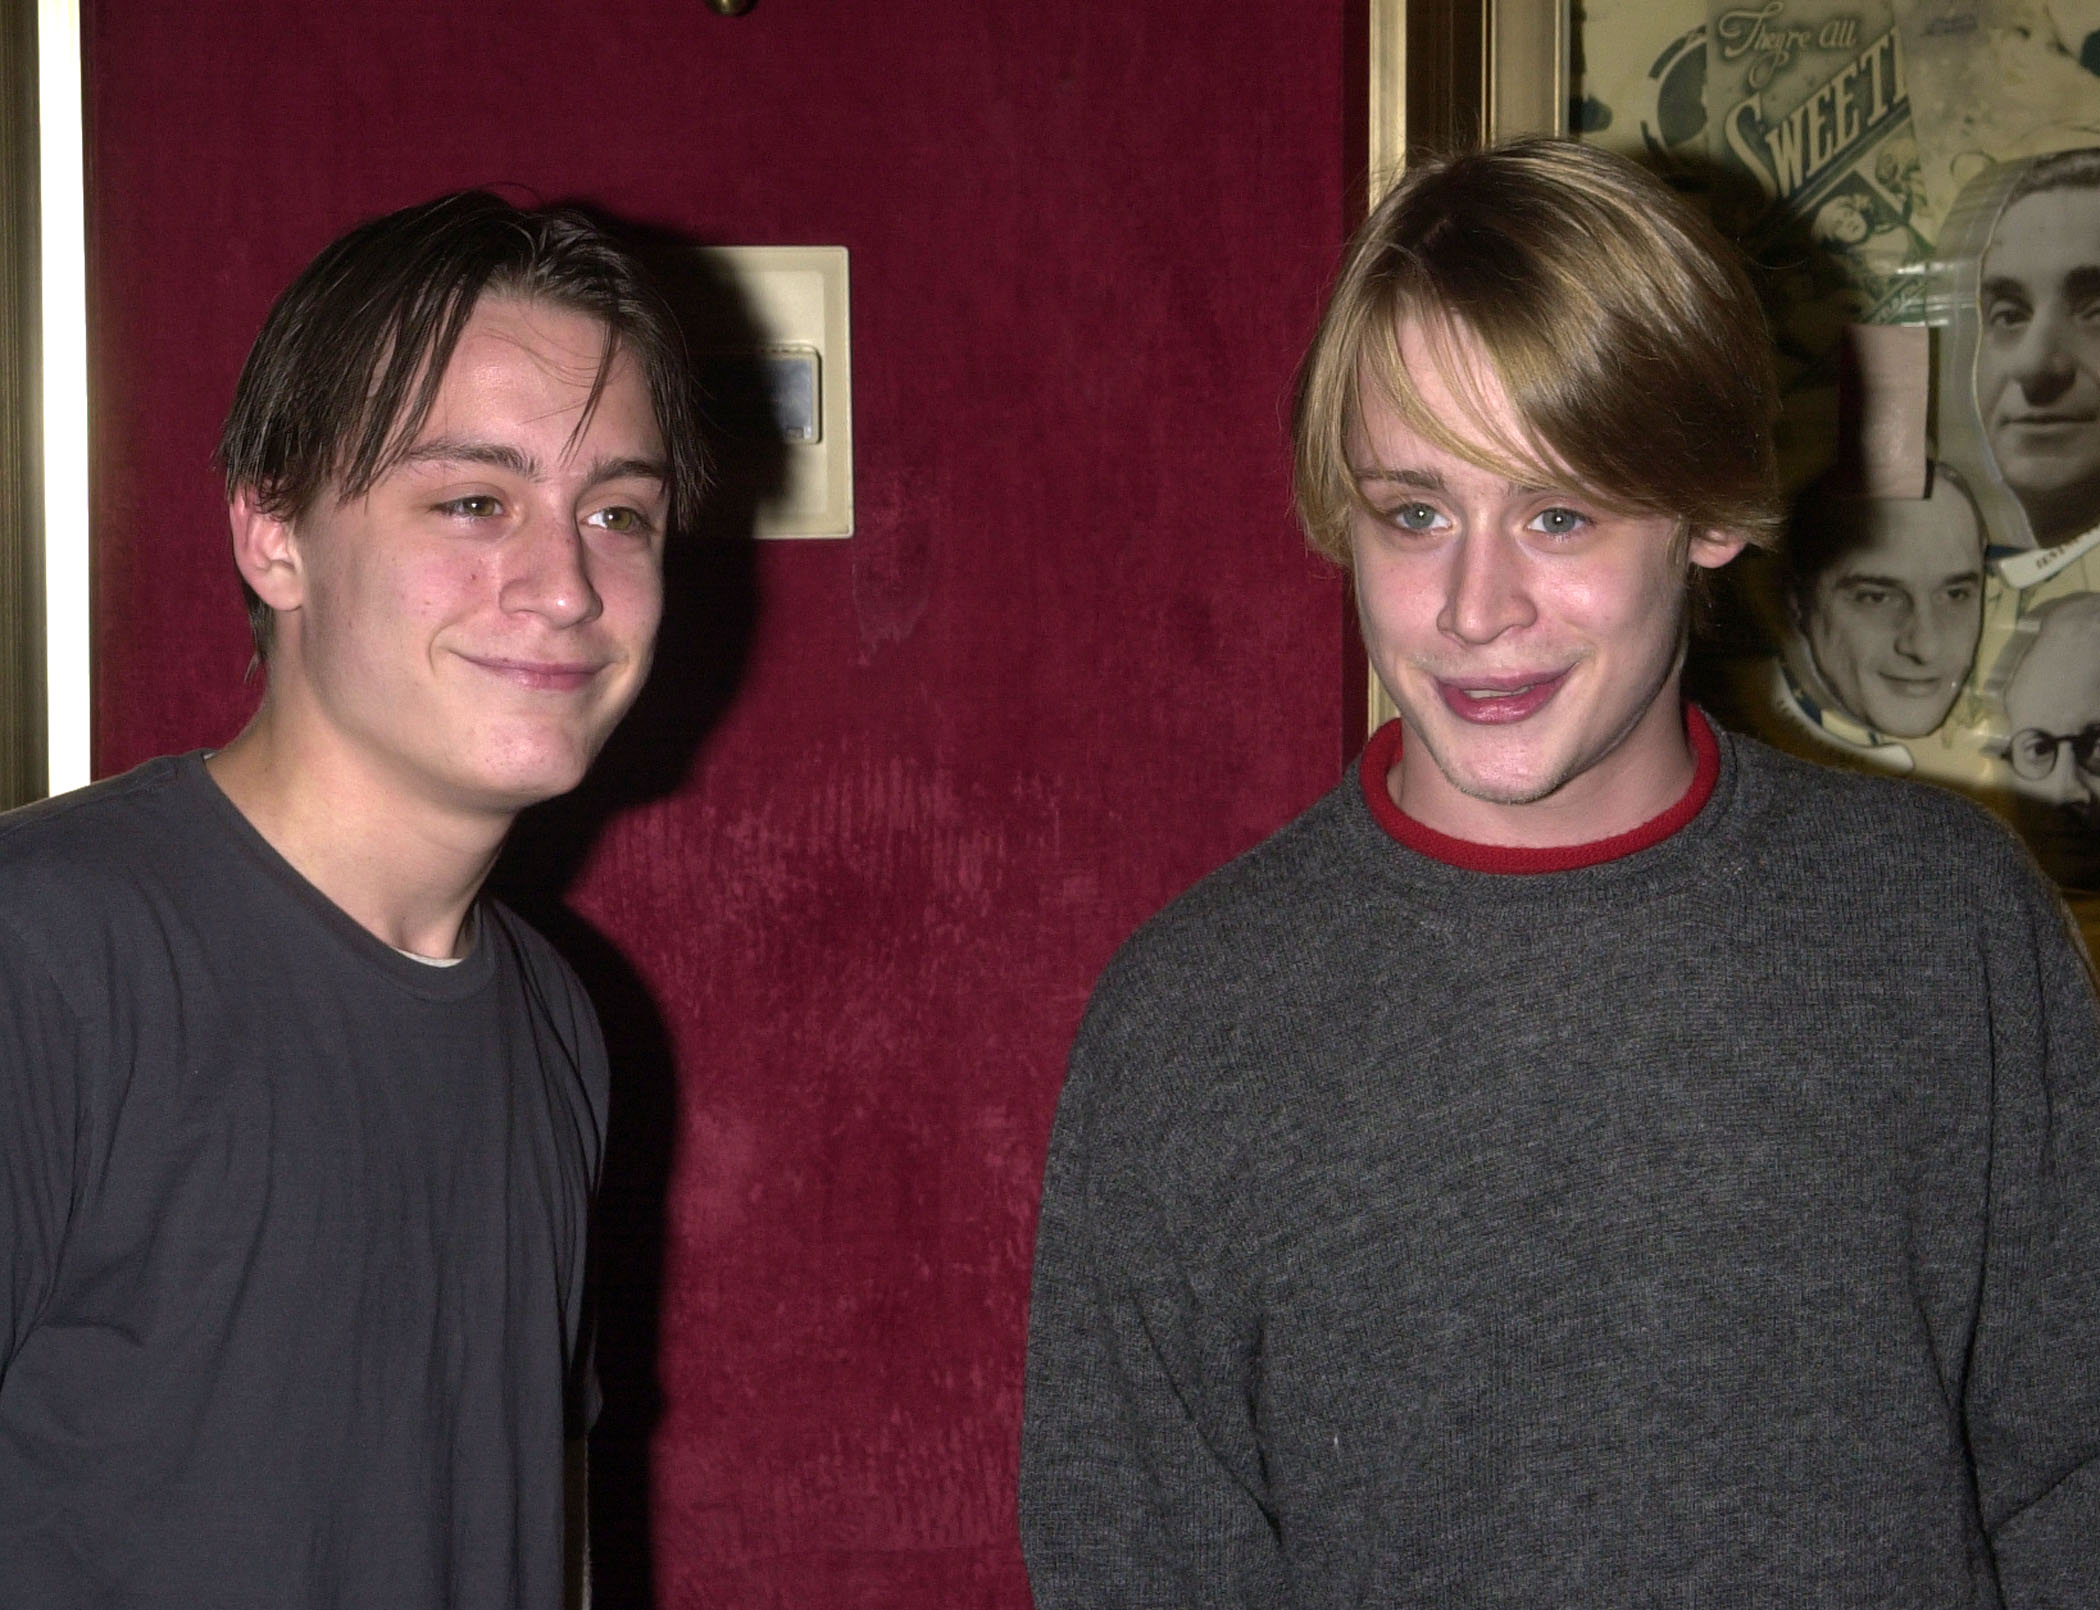 Kieran and Macaulay Culkin at the premiere of "Serendipity" in New York City in 2001 | Source: Getty Images